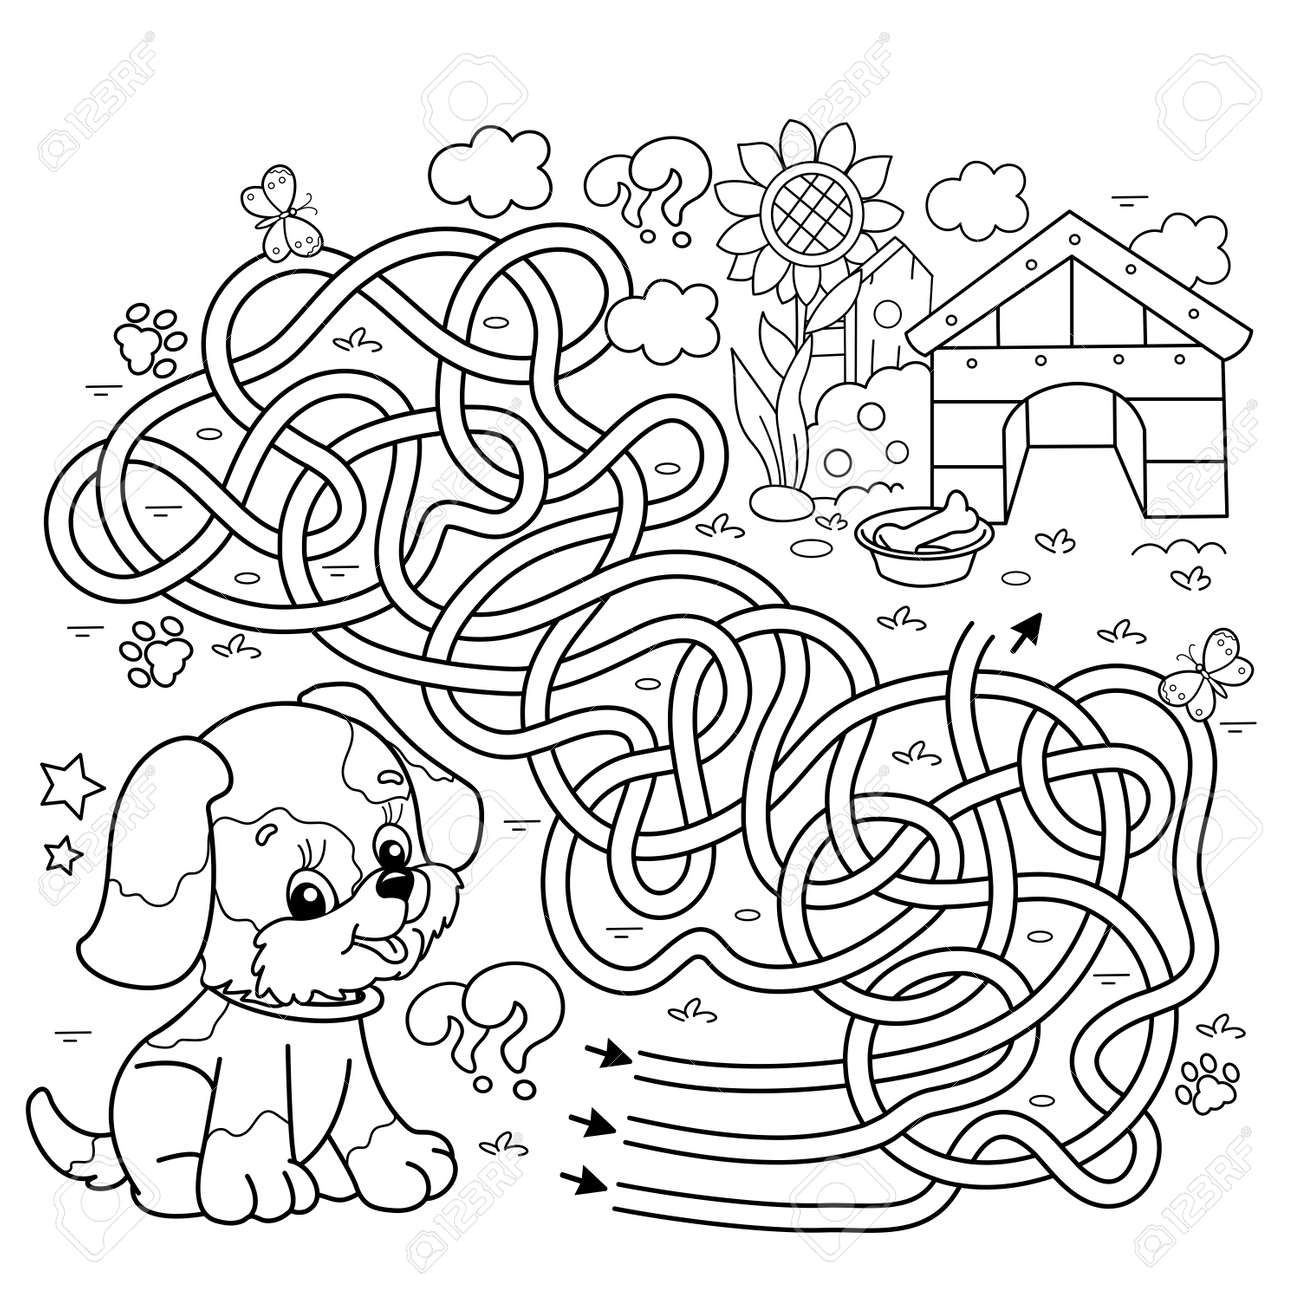 Maze or labyrinth game puzzle tangled road coloring page outline of cartoon little dog with doghouse or kennel coloring book for kids royalty free svg cliparts vectors and stock illustration image